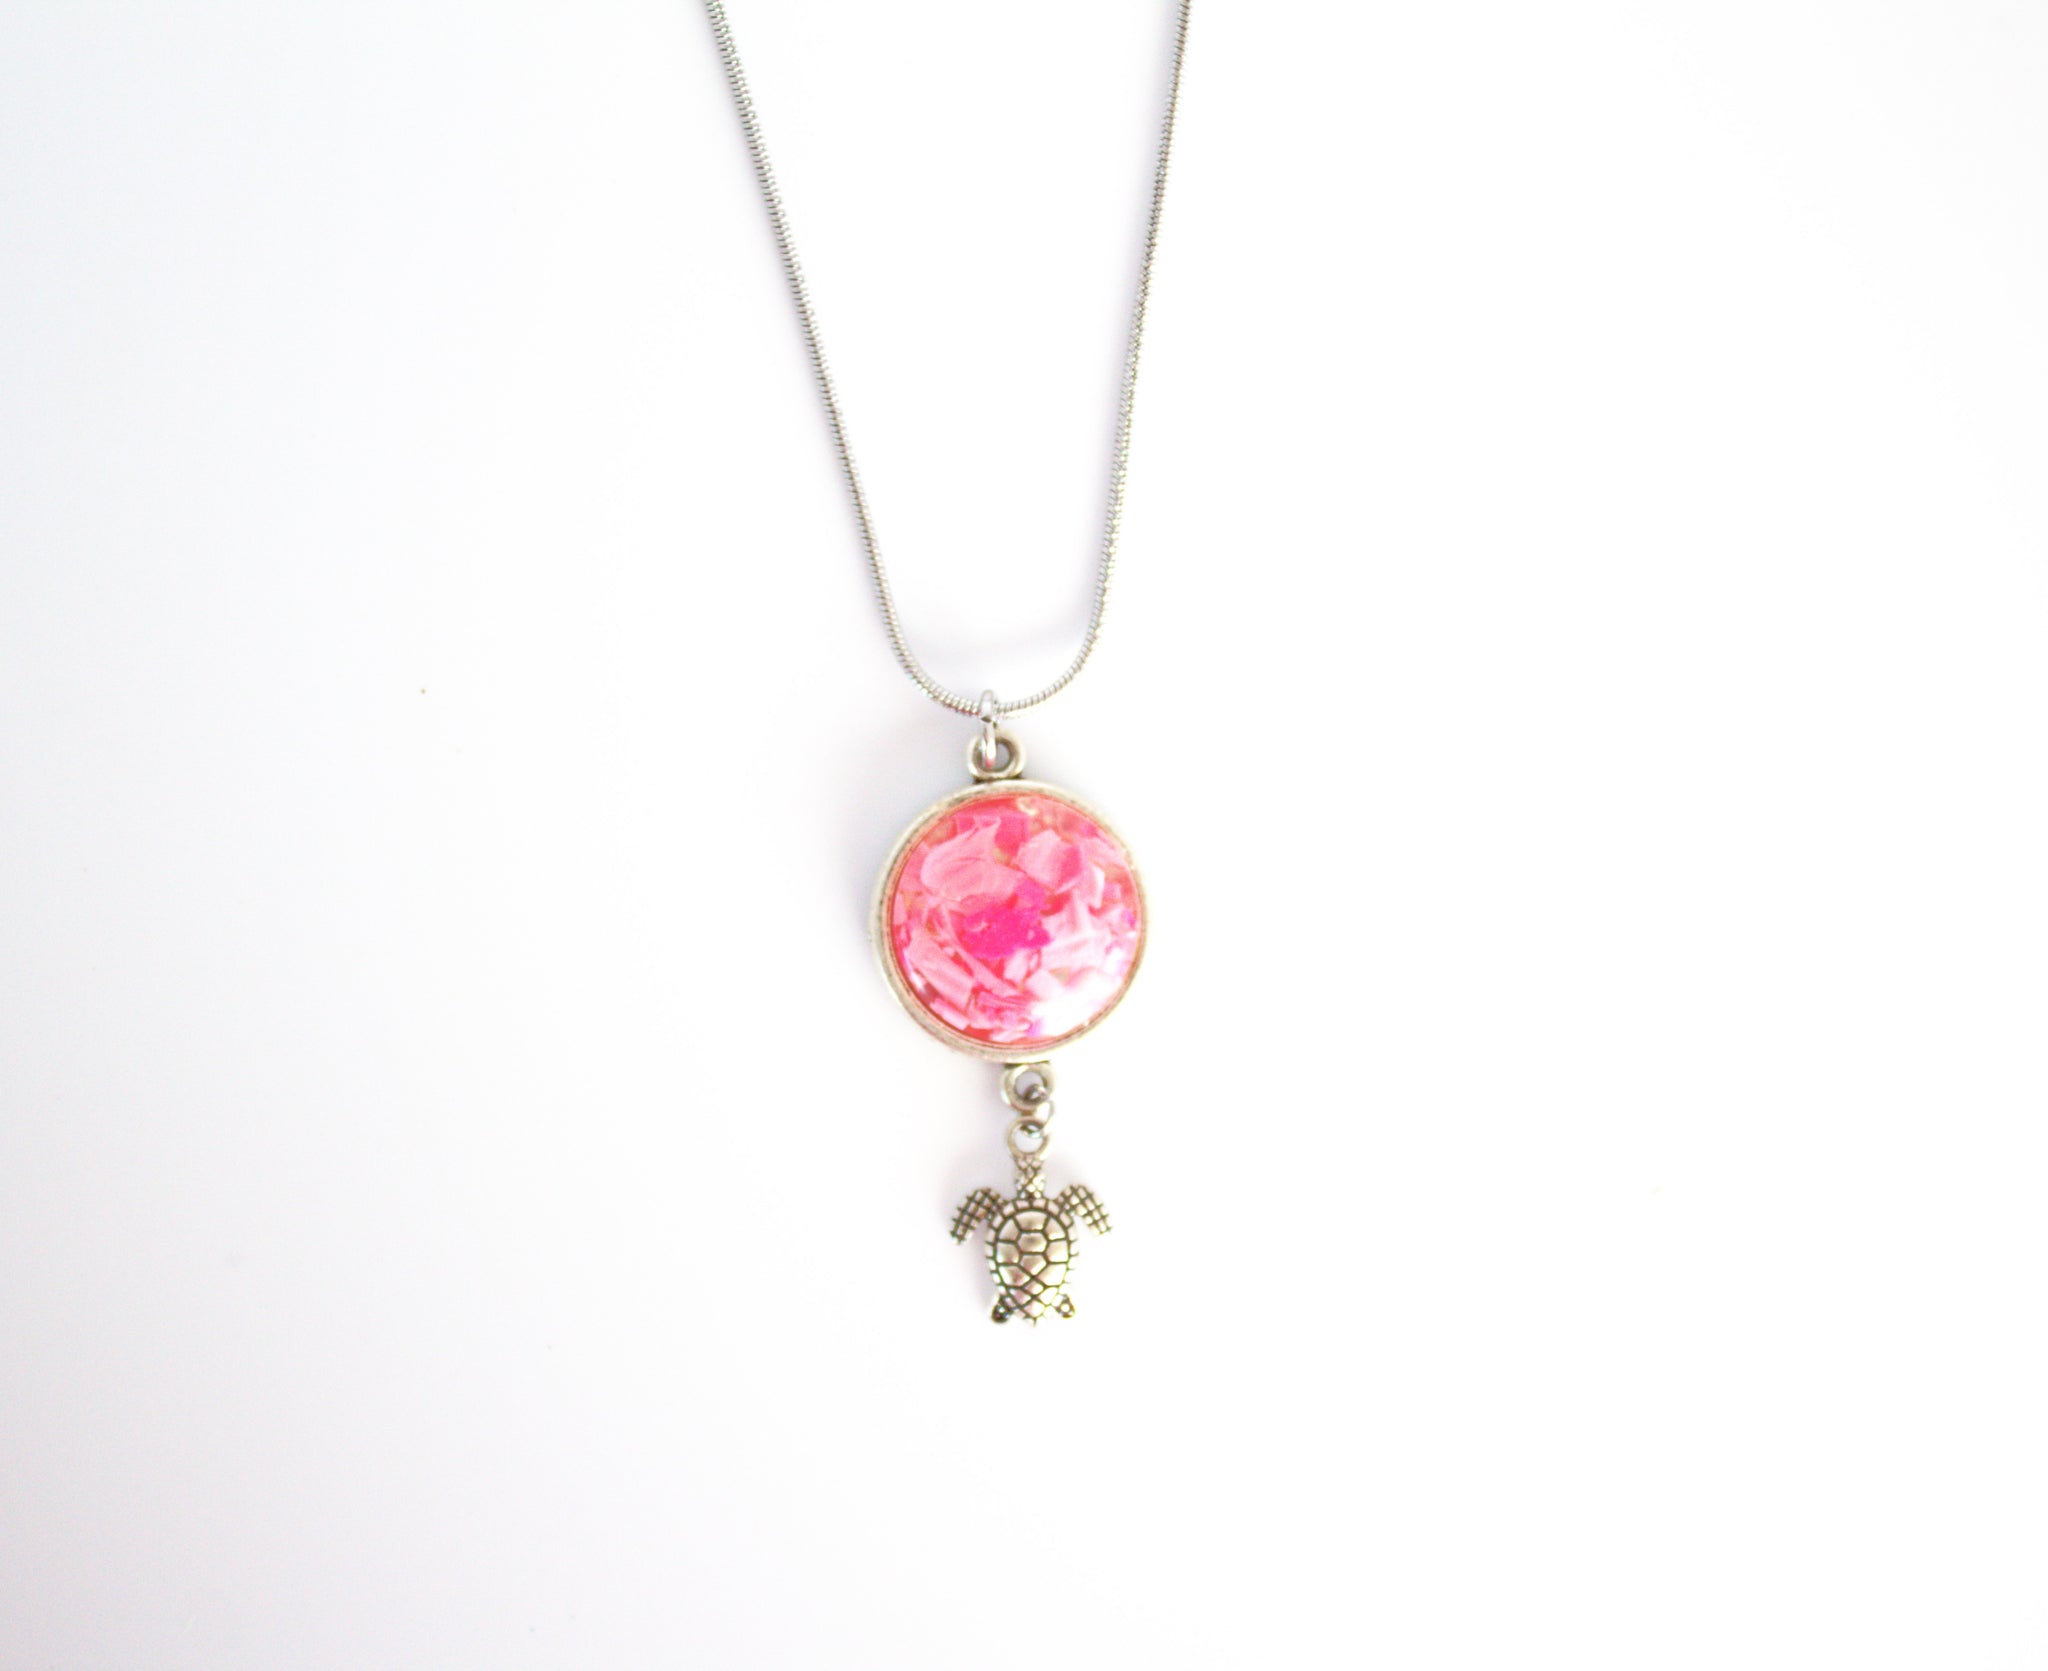 Necklace stainless steel and pendant with babypink Ocean plastic